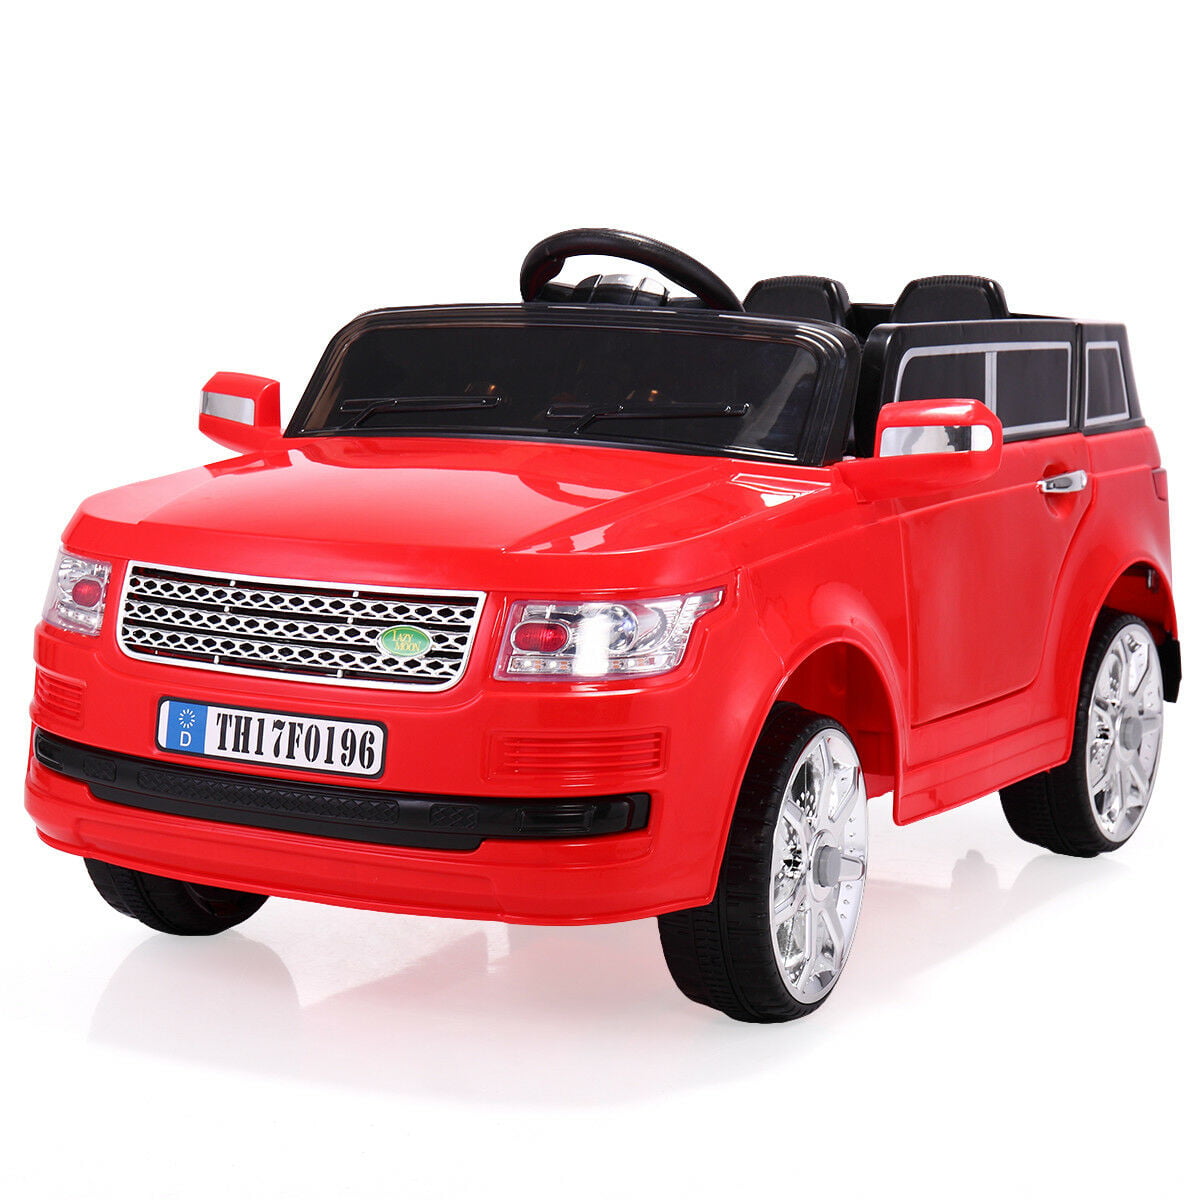 Lowestbest 12V Kids Ride on Car, Battery-Powered Ride-On Mini Car Gifts ...